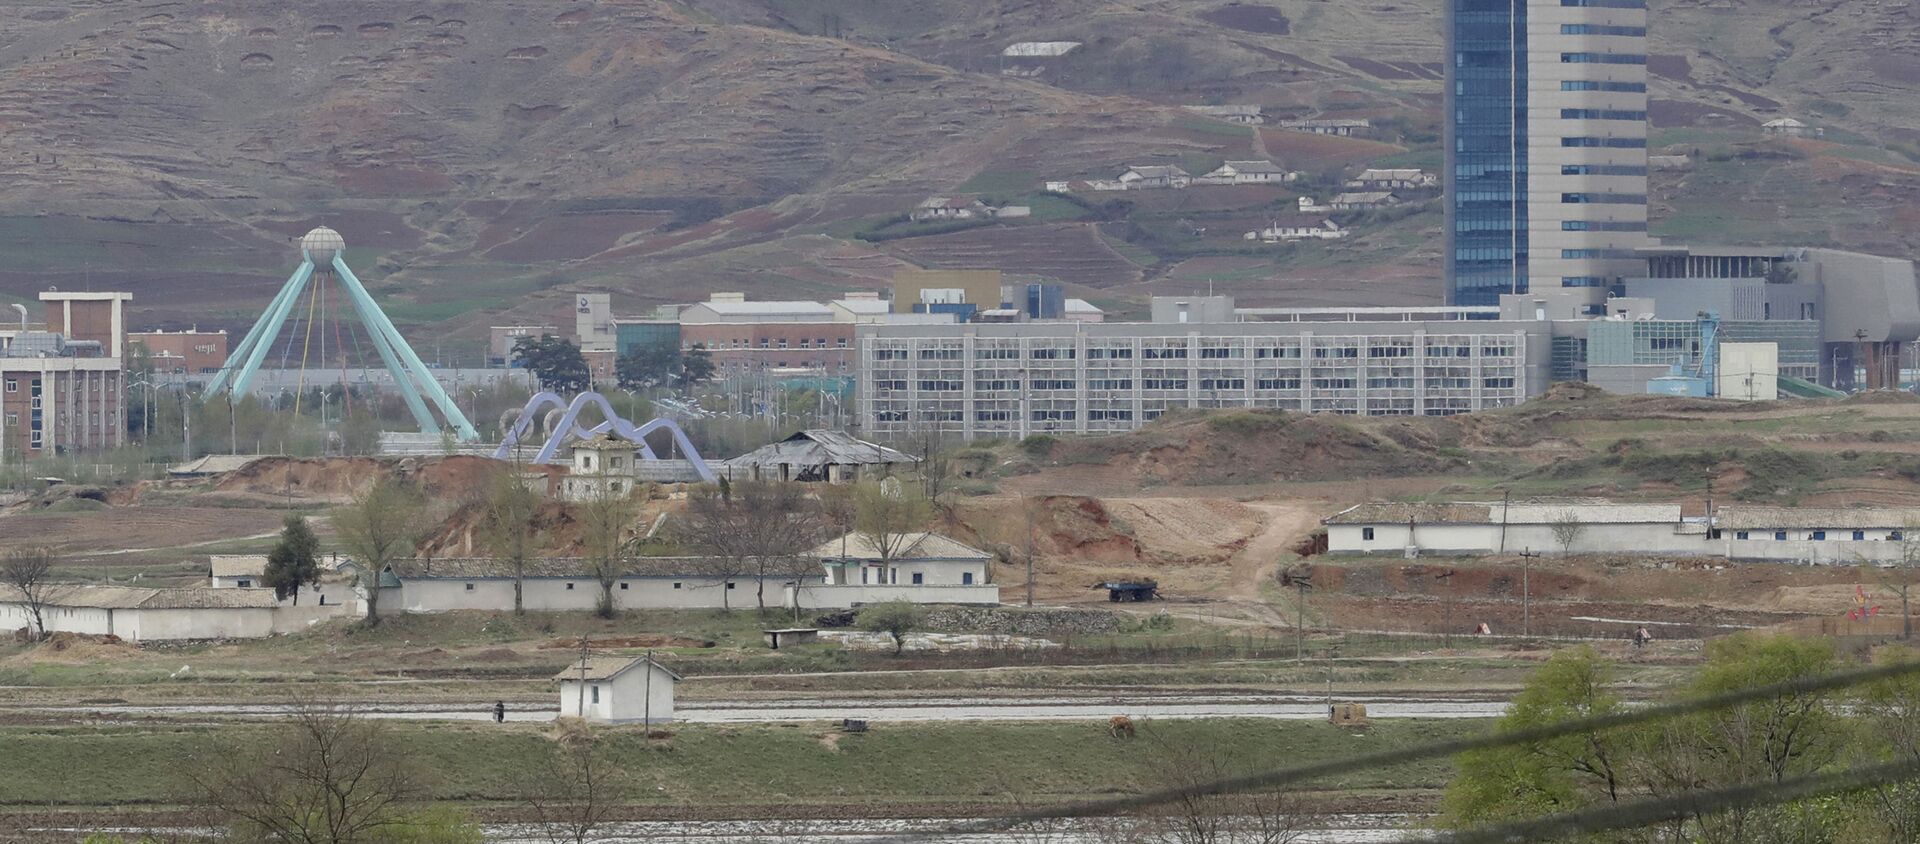 FILE - In this April 24, 2018, file photo, the Kaesong industrial complex in North Korea is seen from the Taesungdong freedom village inside the demilitarized zone during a press tour in Paju, South Korea - Sputnik International, 1920, 09.02.2021